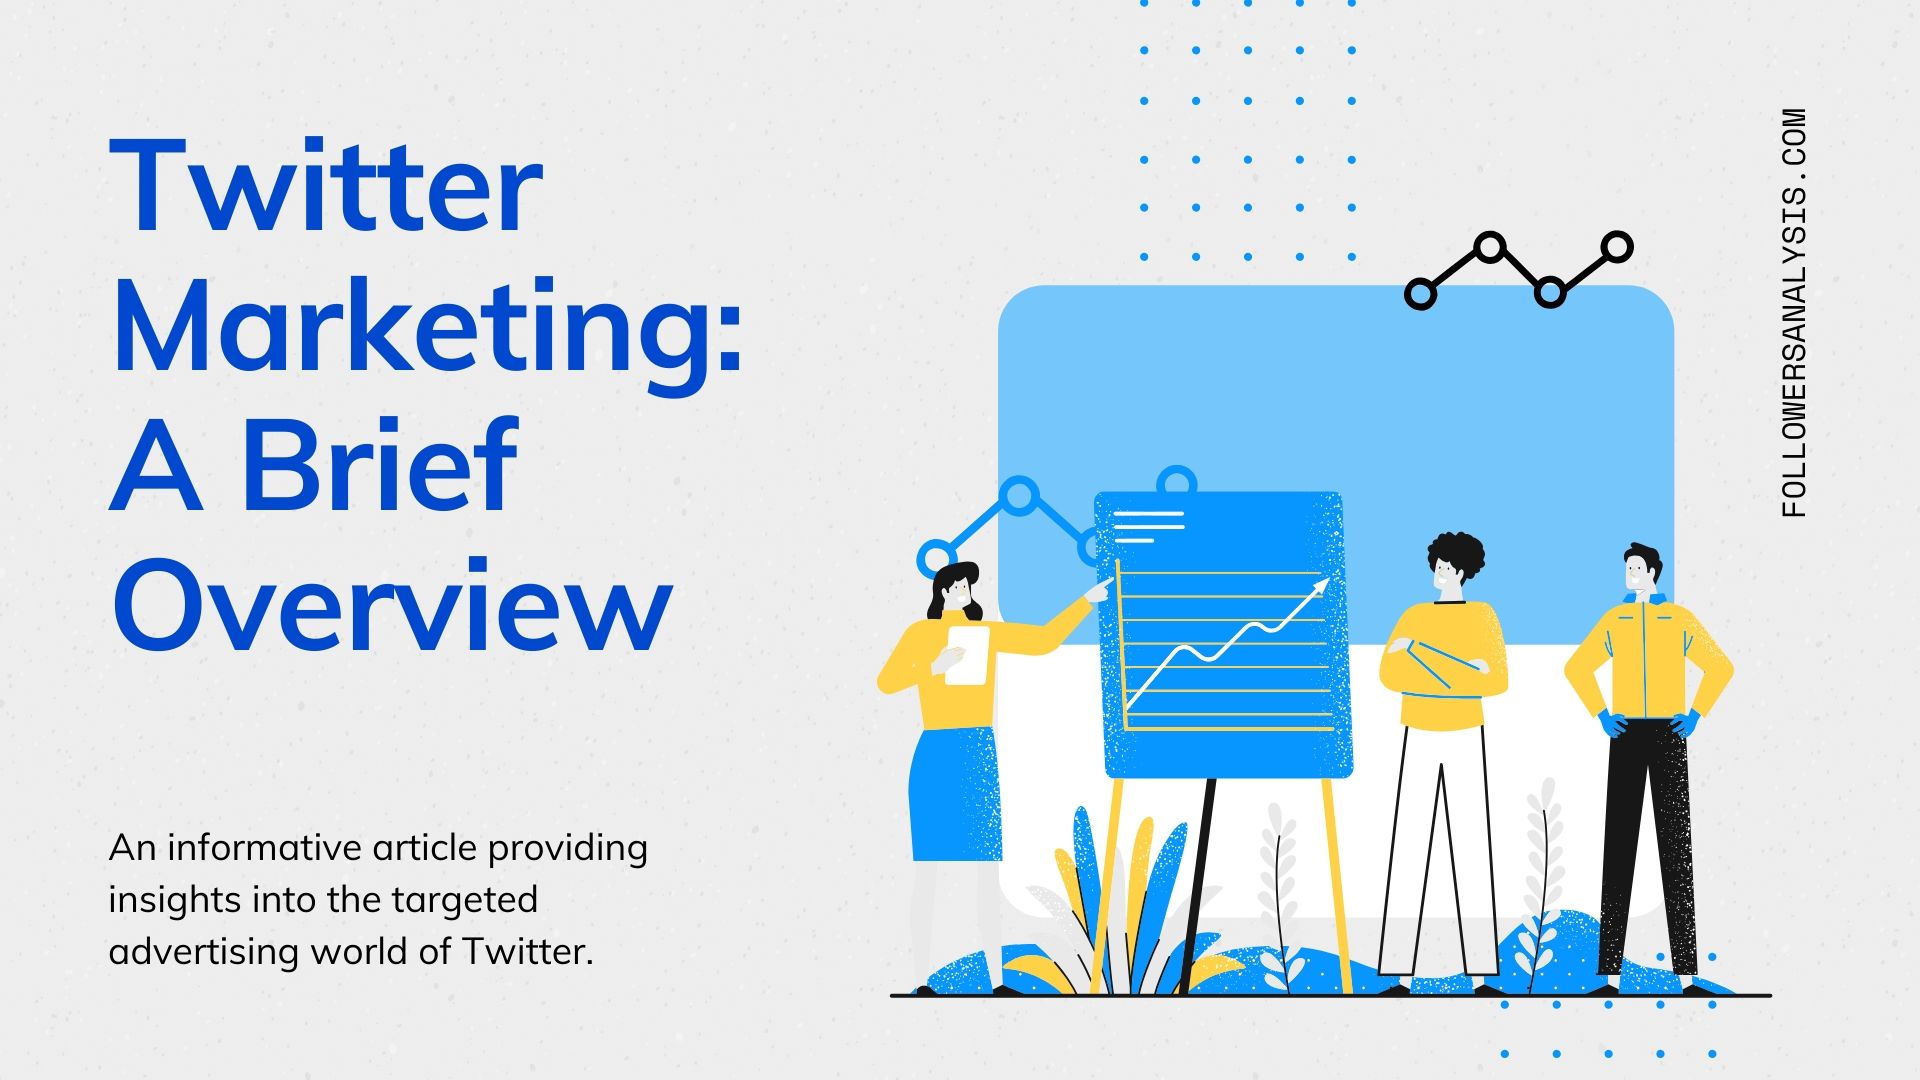 Twitter Marketing: A Brief Overview